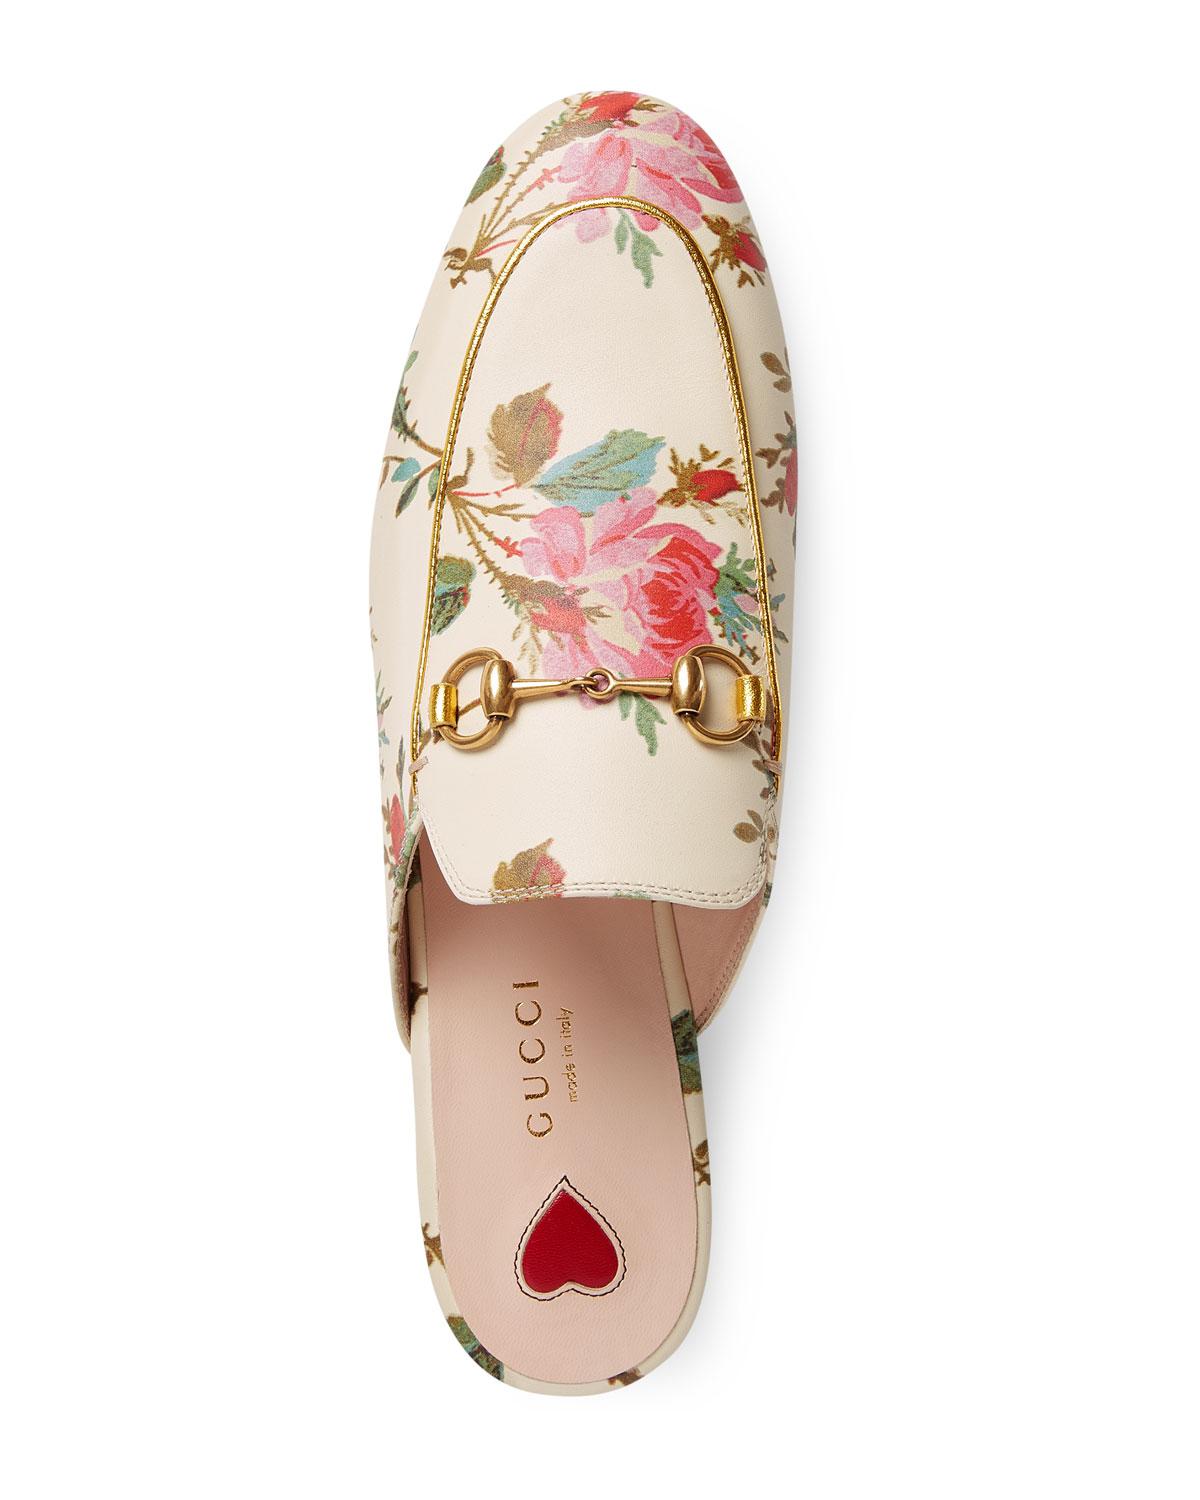 Gucci Leather Flat Princetown Floral Print Mule - Lyst